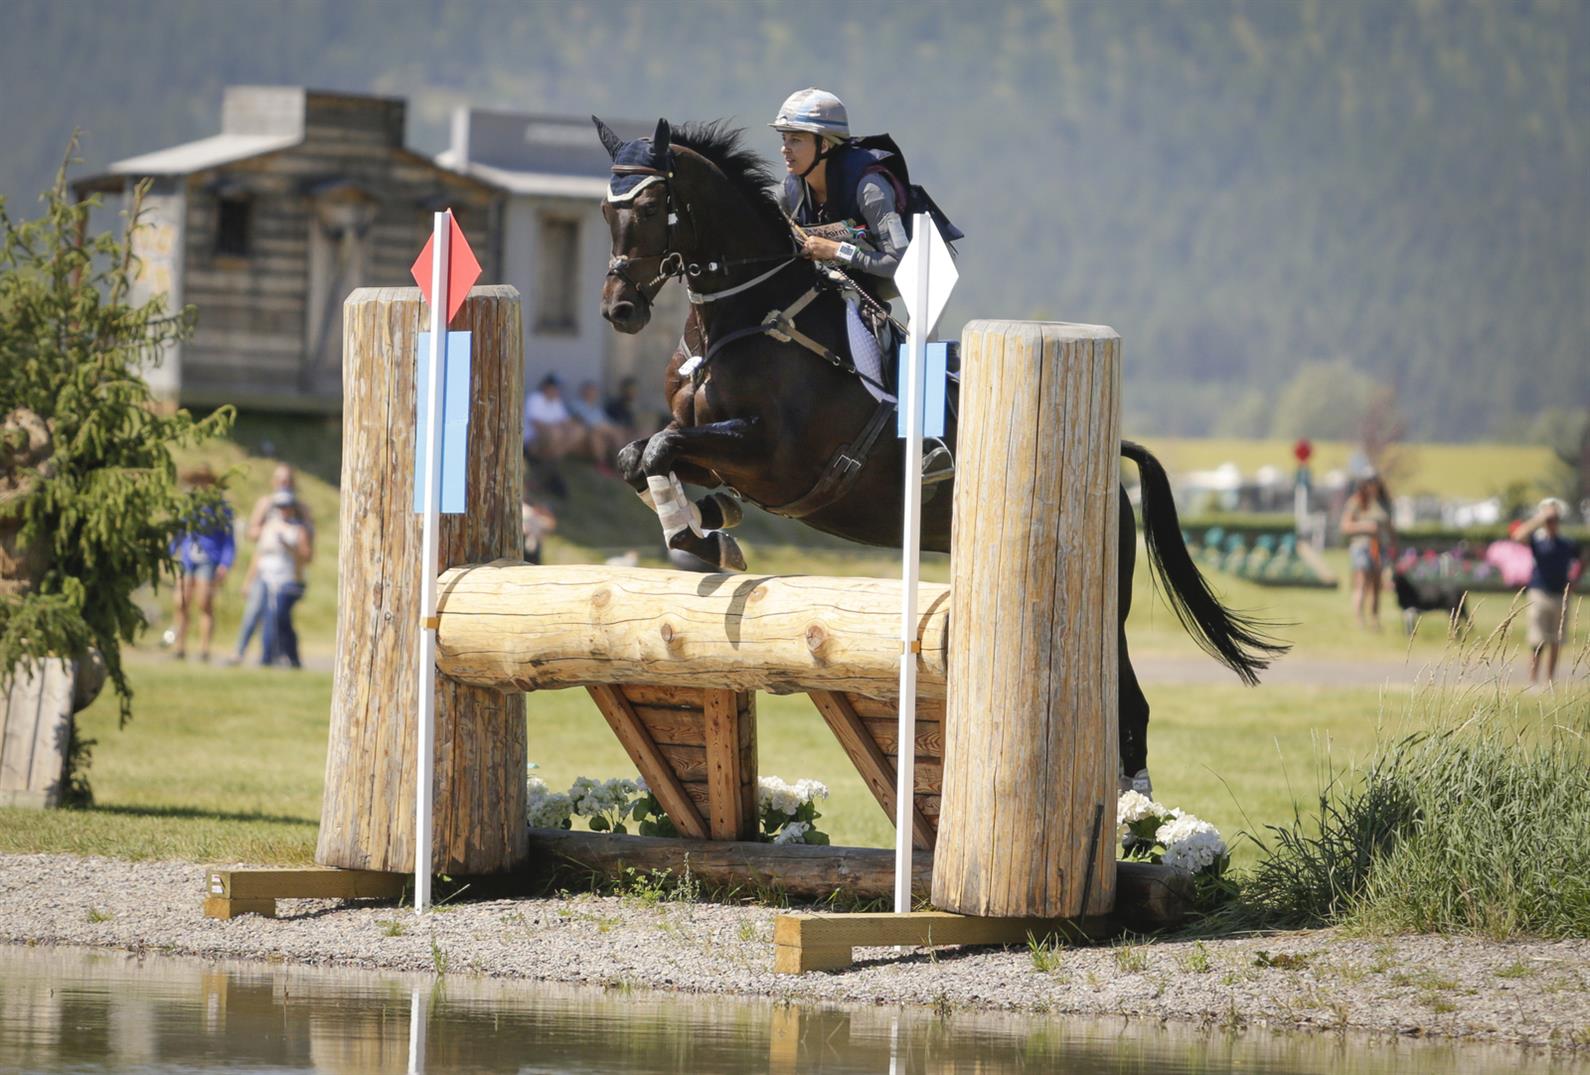 Young Riders Tackle Cross-Country at the USEF Eventing Young Rider  Championships Presented By USEA